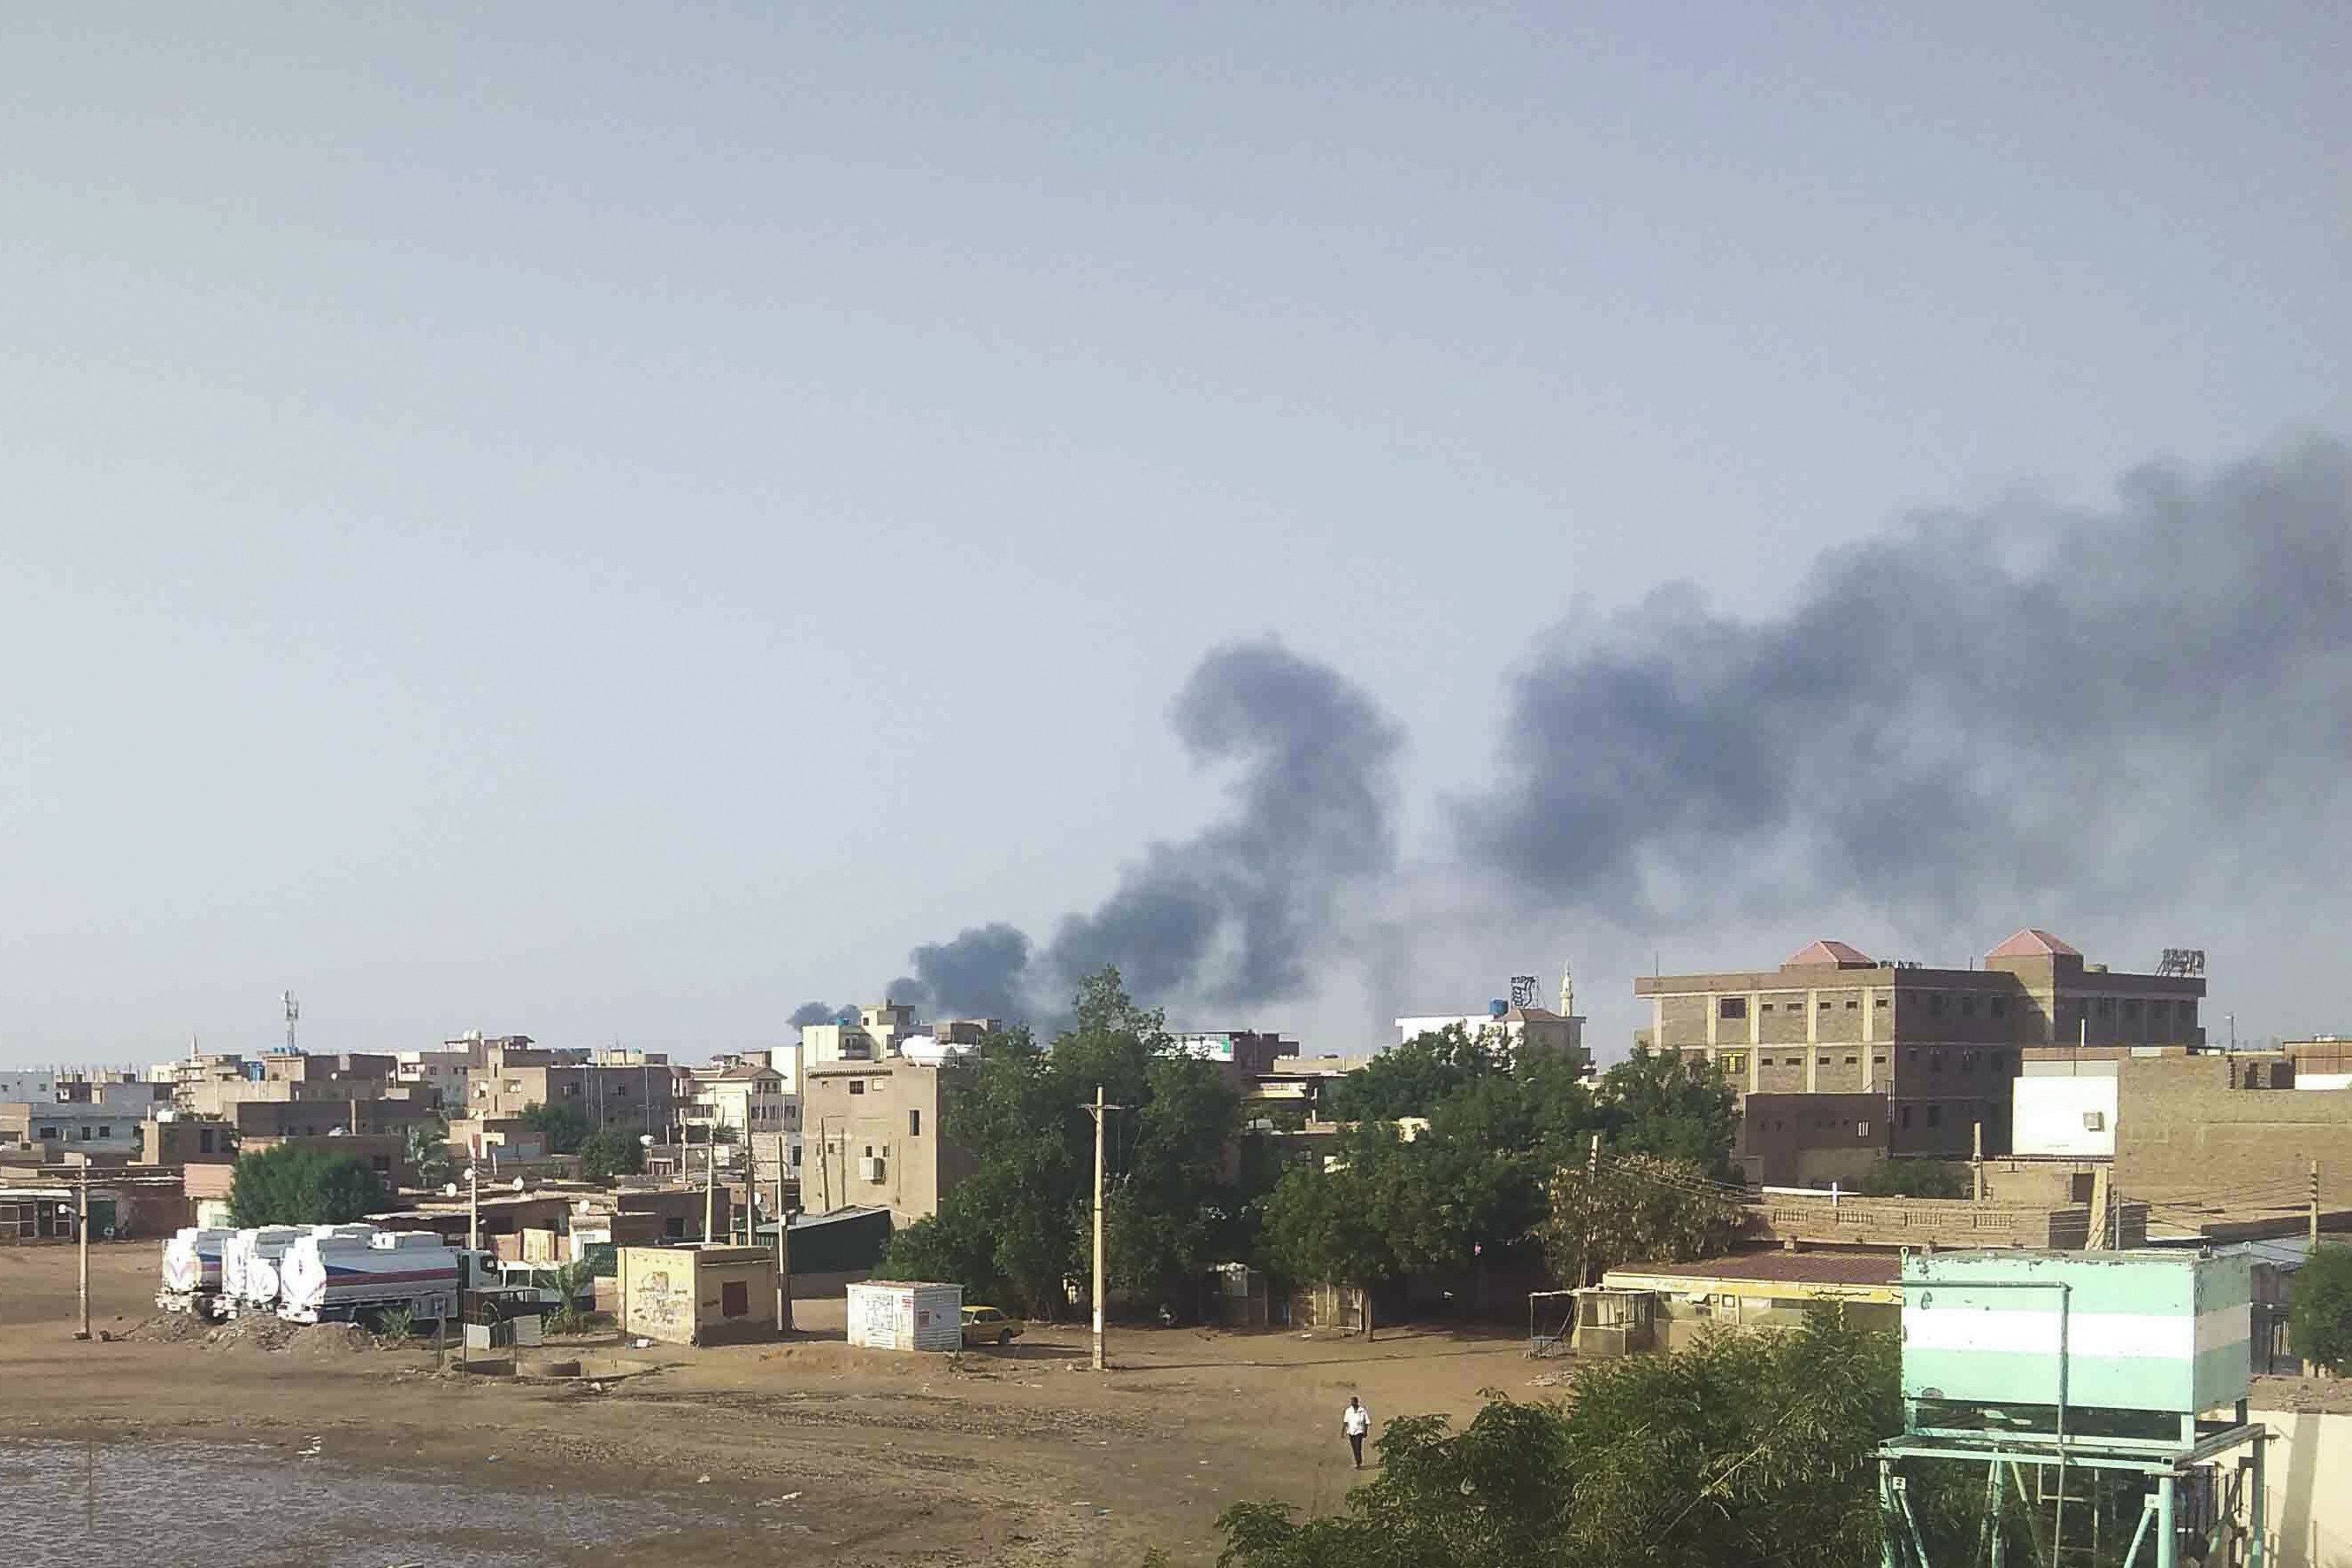 Smoke rises over Khartoum, Sudan on Friday as cashes between warring factions resumed after a three-day cease-fire expired. Photo: AP